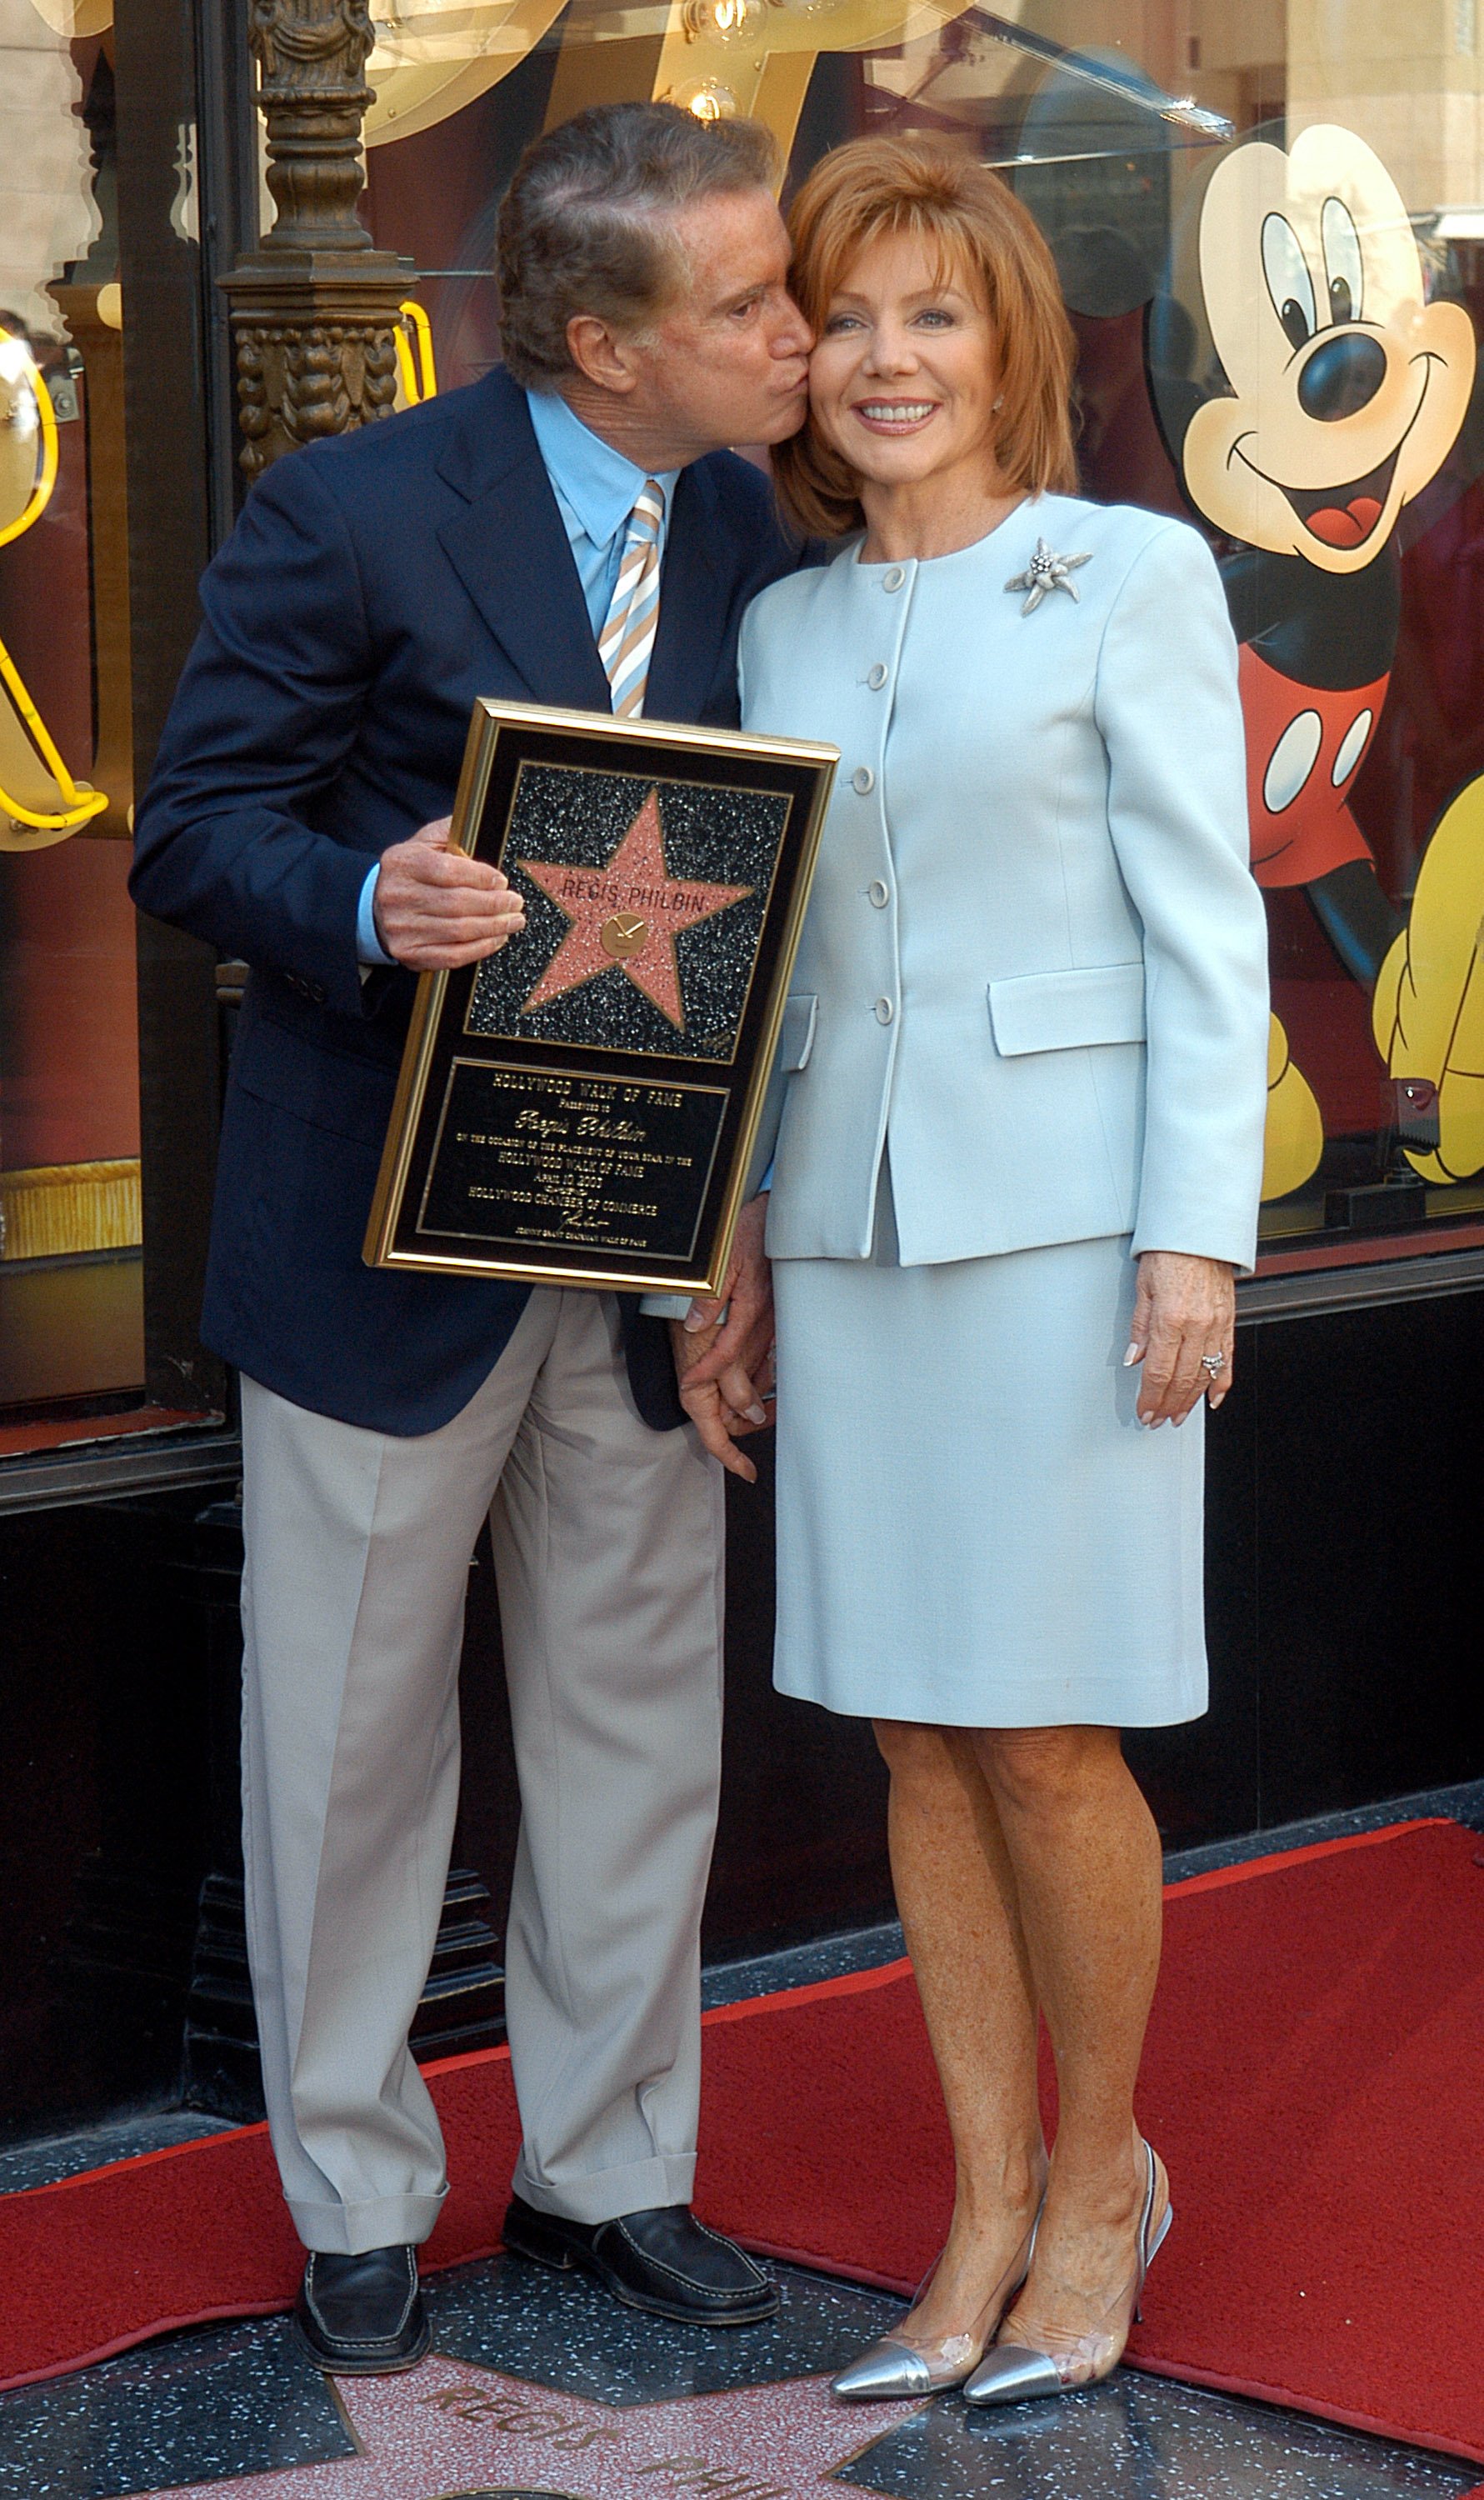 Regis Philbin and wife Joy Philbin during Regis Philbin Honored with a Star on the Hollywood Walk of Fame. | Photo: Getty Images